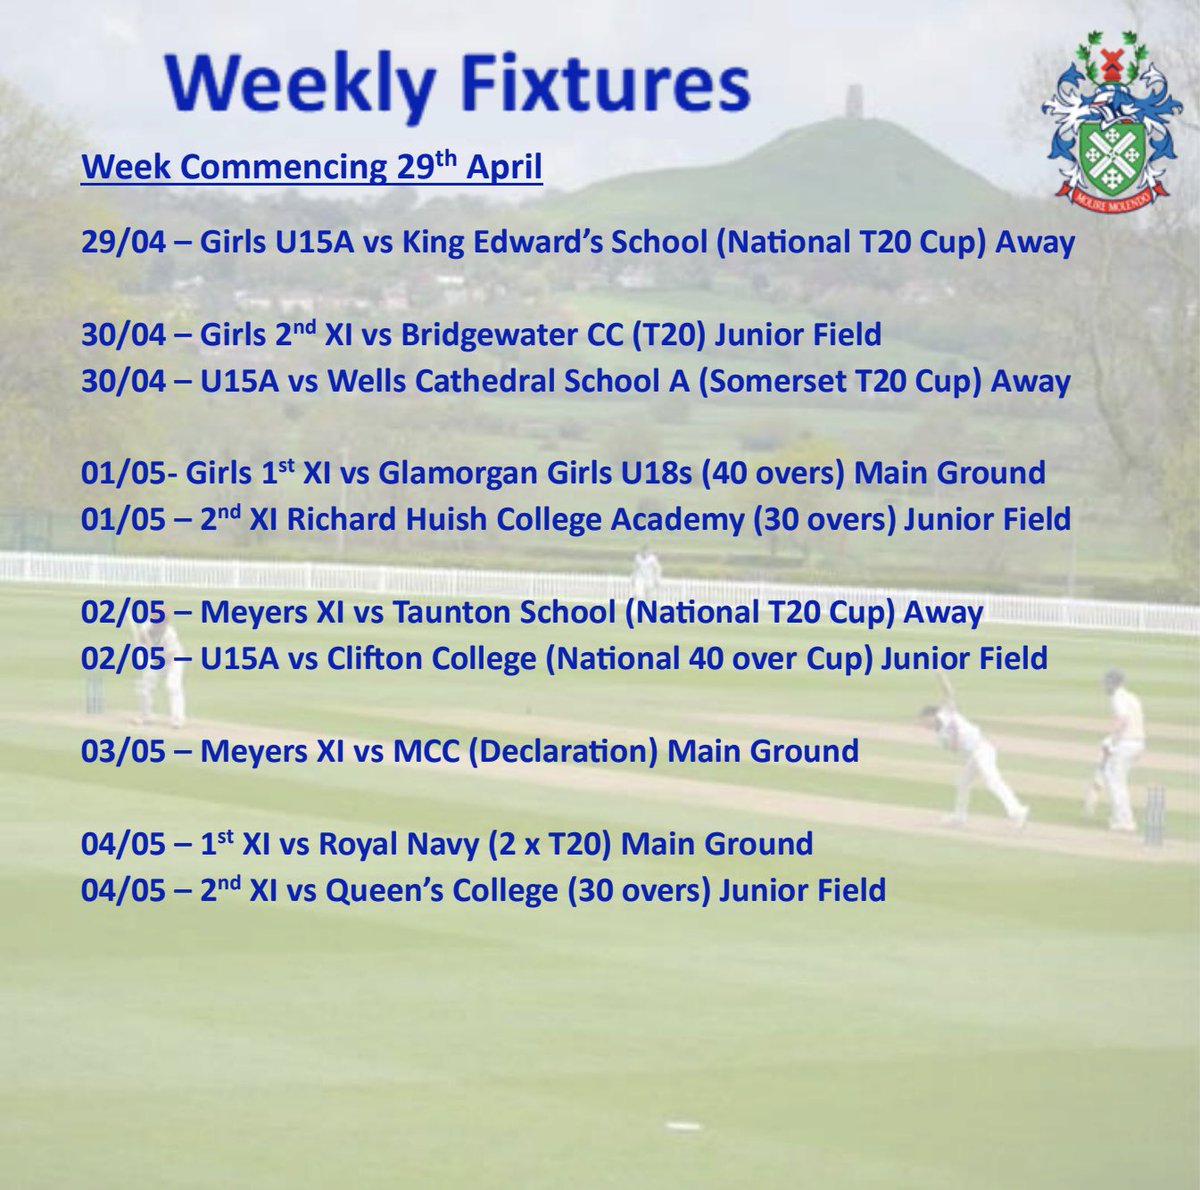 Plenty more great fixtures, with 4 cup matches. The Girls U15s started the week of well with a close fought win by 10 runs in their National T20 game about KES this afternoon. Cannot wait to entertain the Royal Navy later on in the week🏏#schoolcricket #MCC